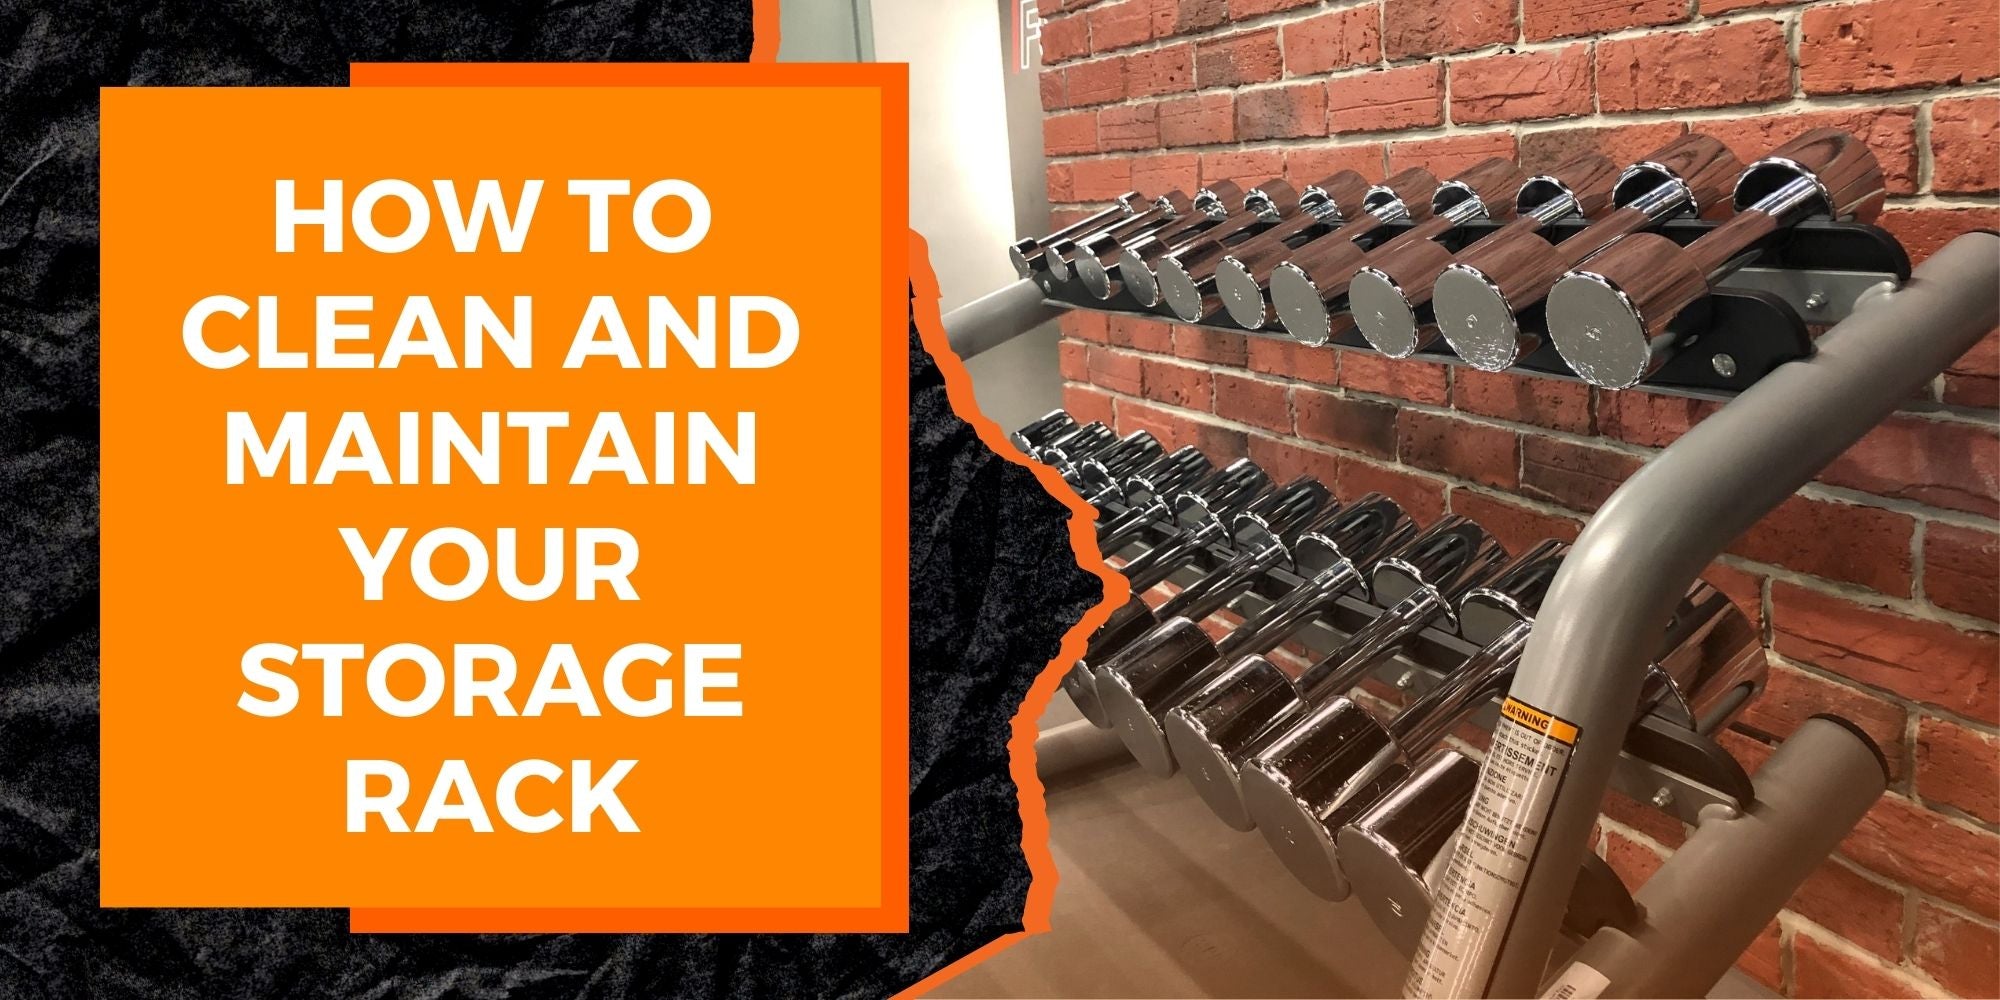 How to Clean and Maintain Your Storage Rack